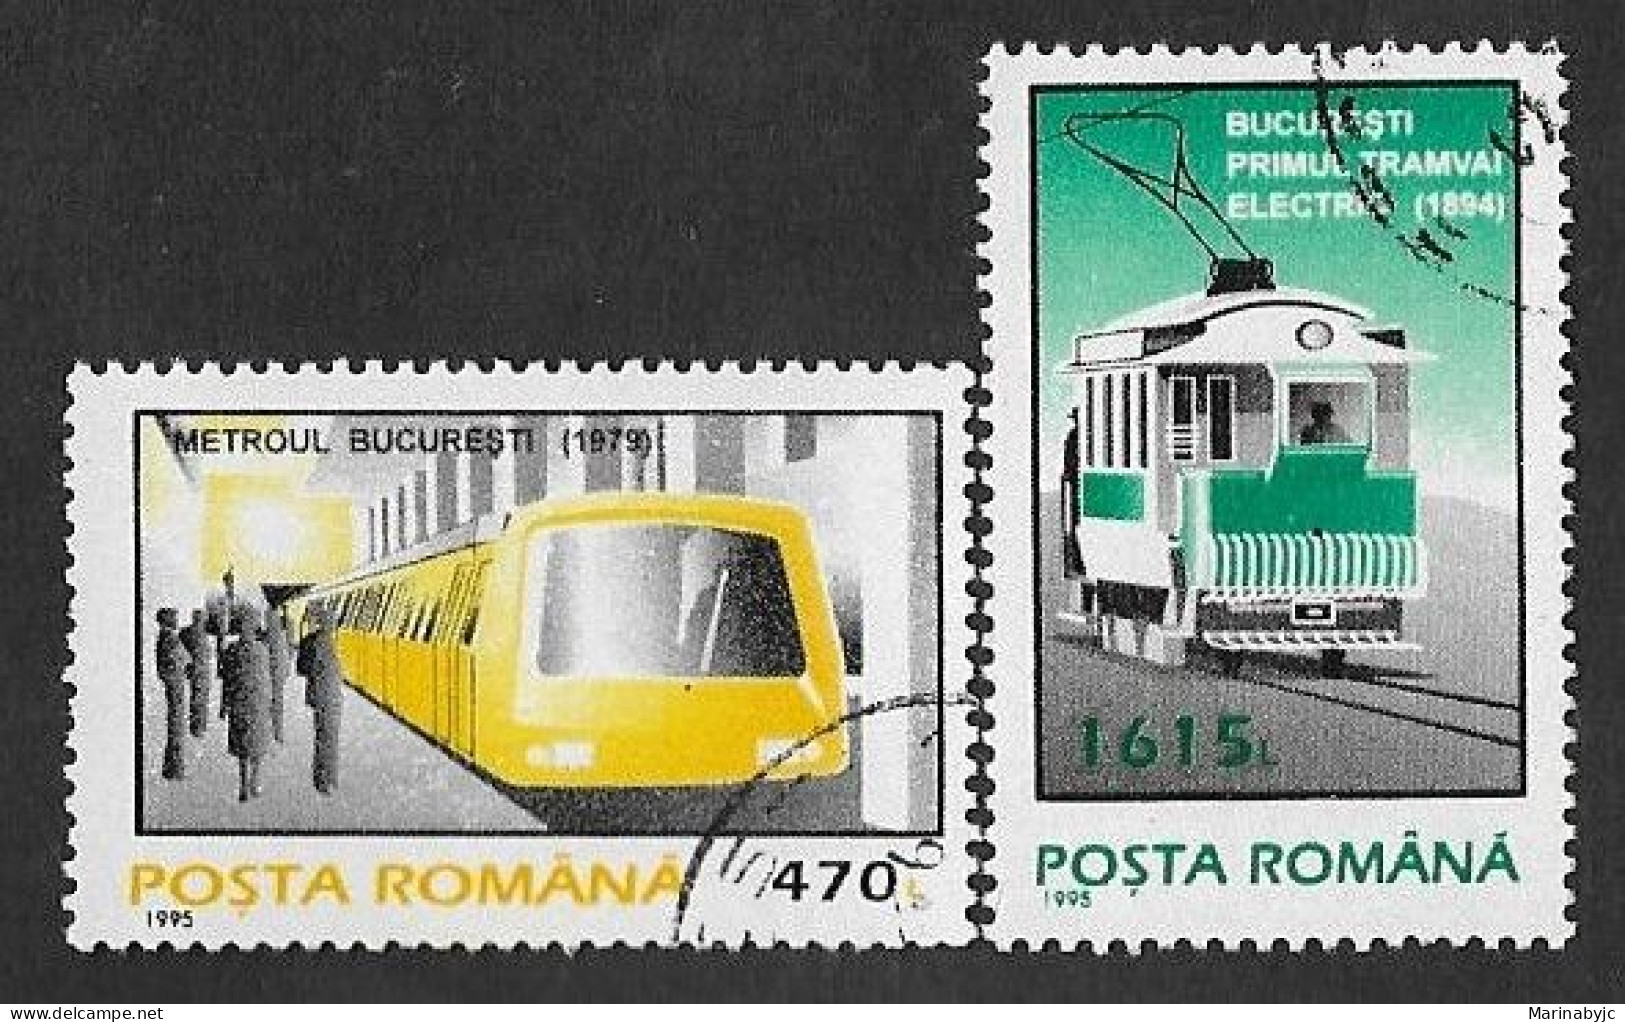 SE)1995 ROMANIA, FROM THE TRAINS SERIES, THE BUCHAREST METRO, 1ST ELECTRIC TRAIN, 2 CTO STAMPS - Gebraucht